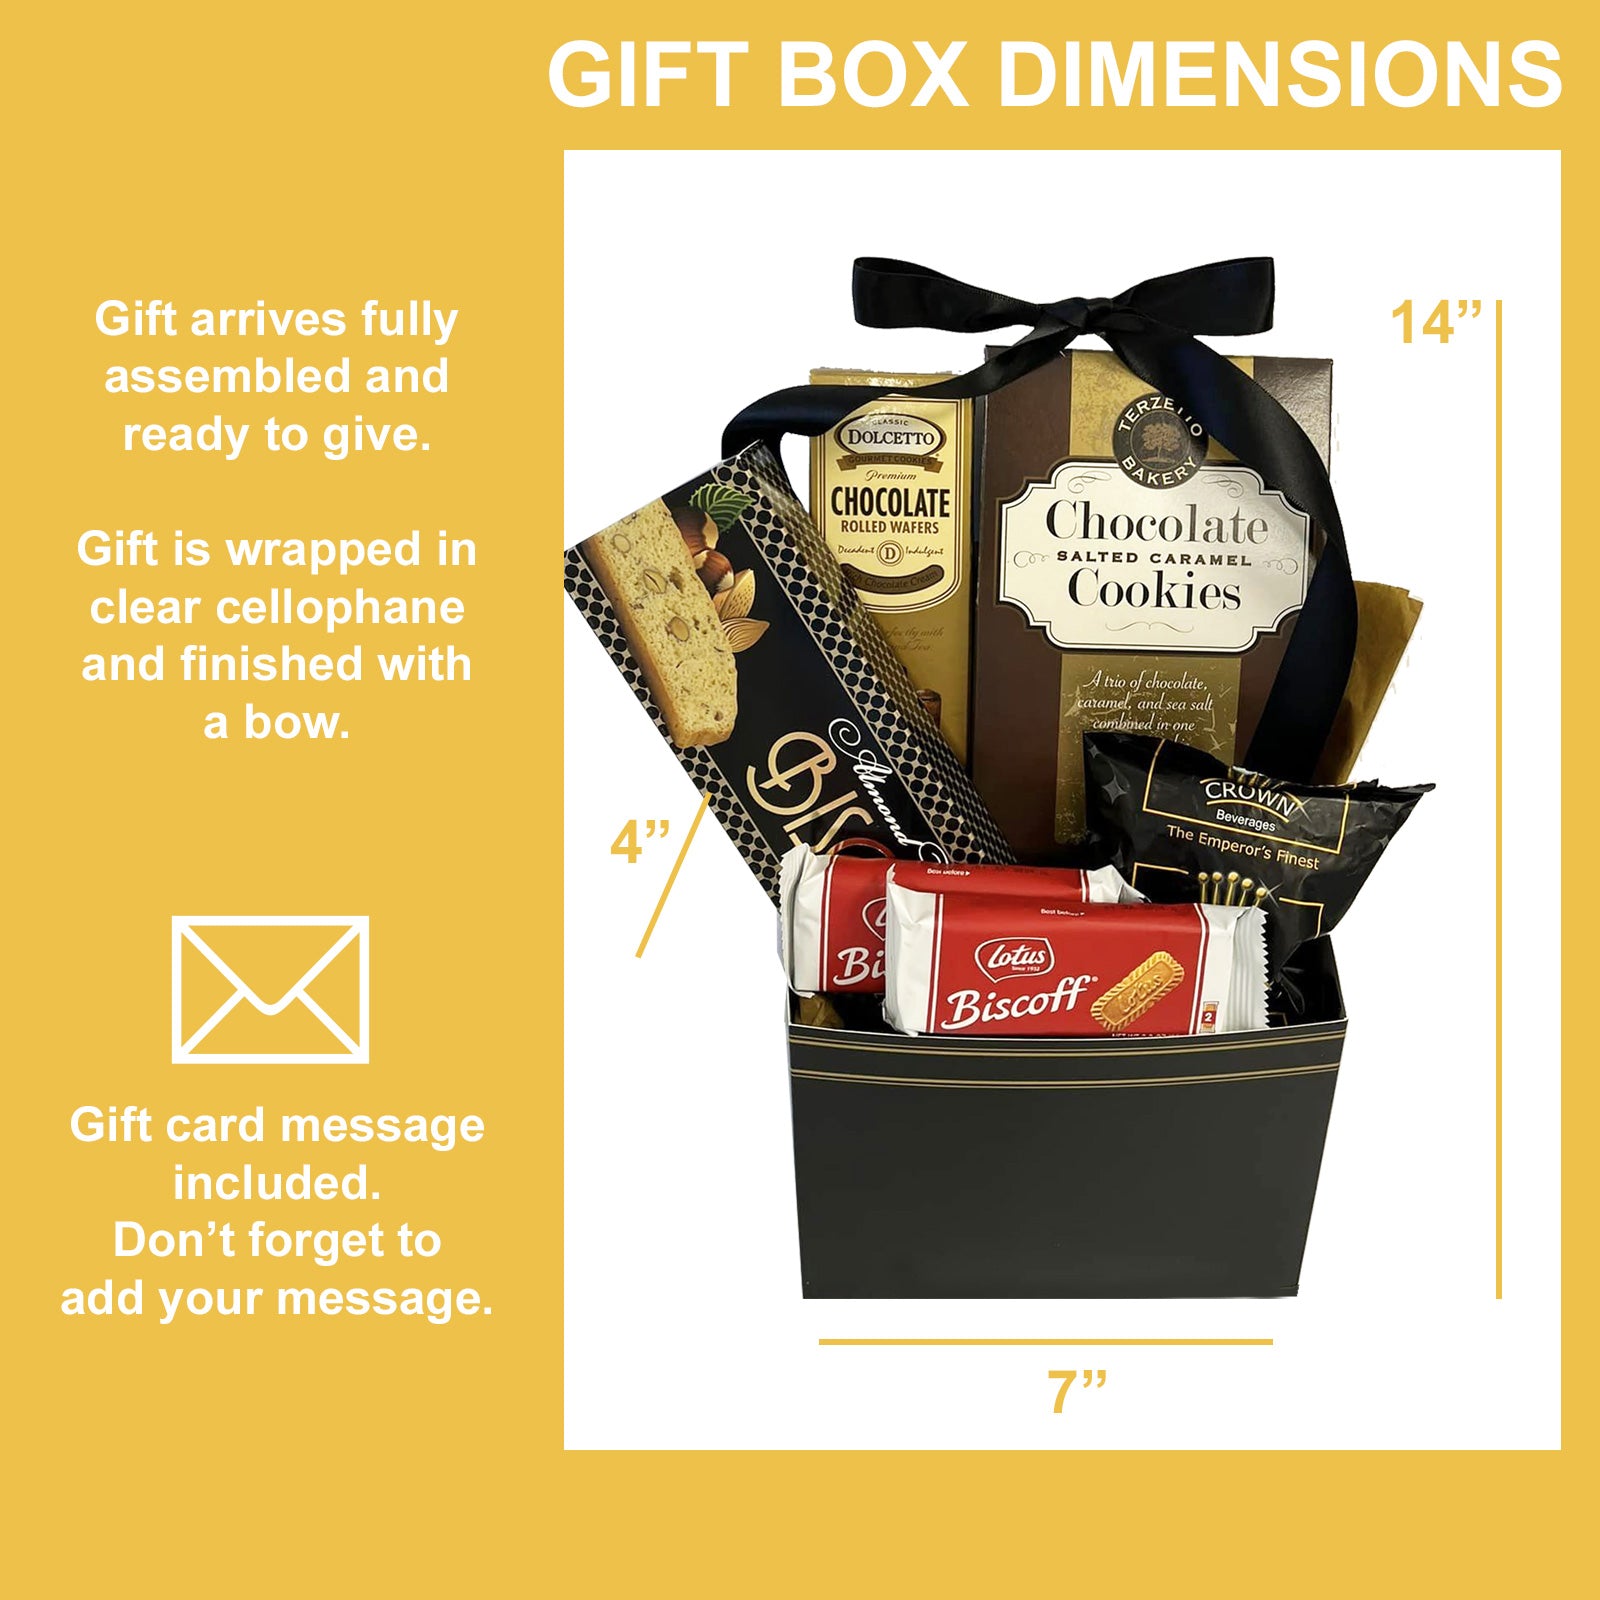 Sympathy Gift Box for Loss of Loved One with Coffee and Cookies a Thoughtful Bereavement Gift